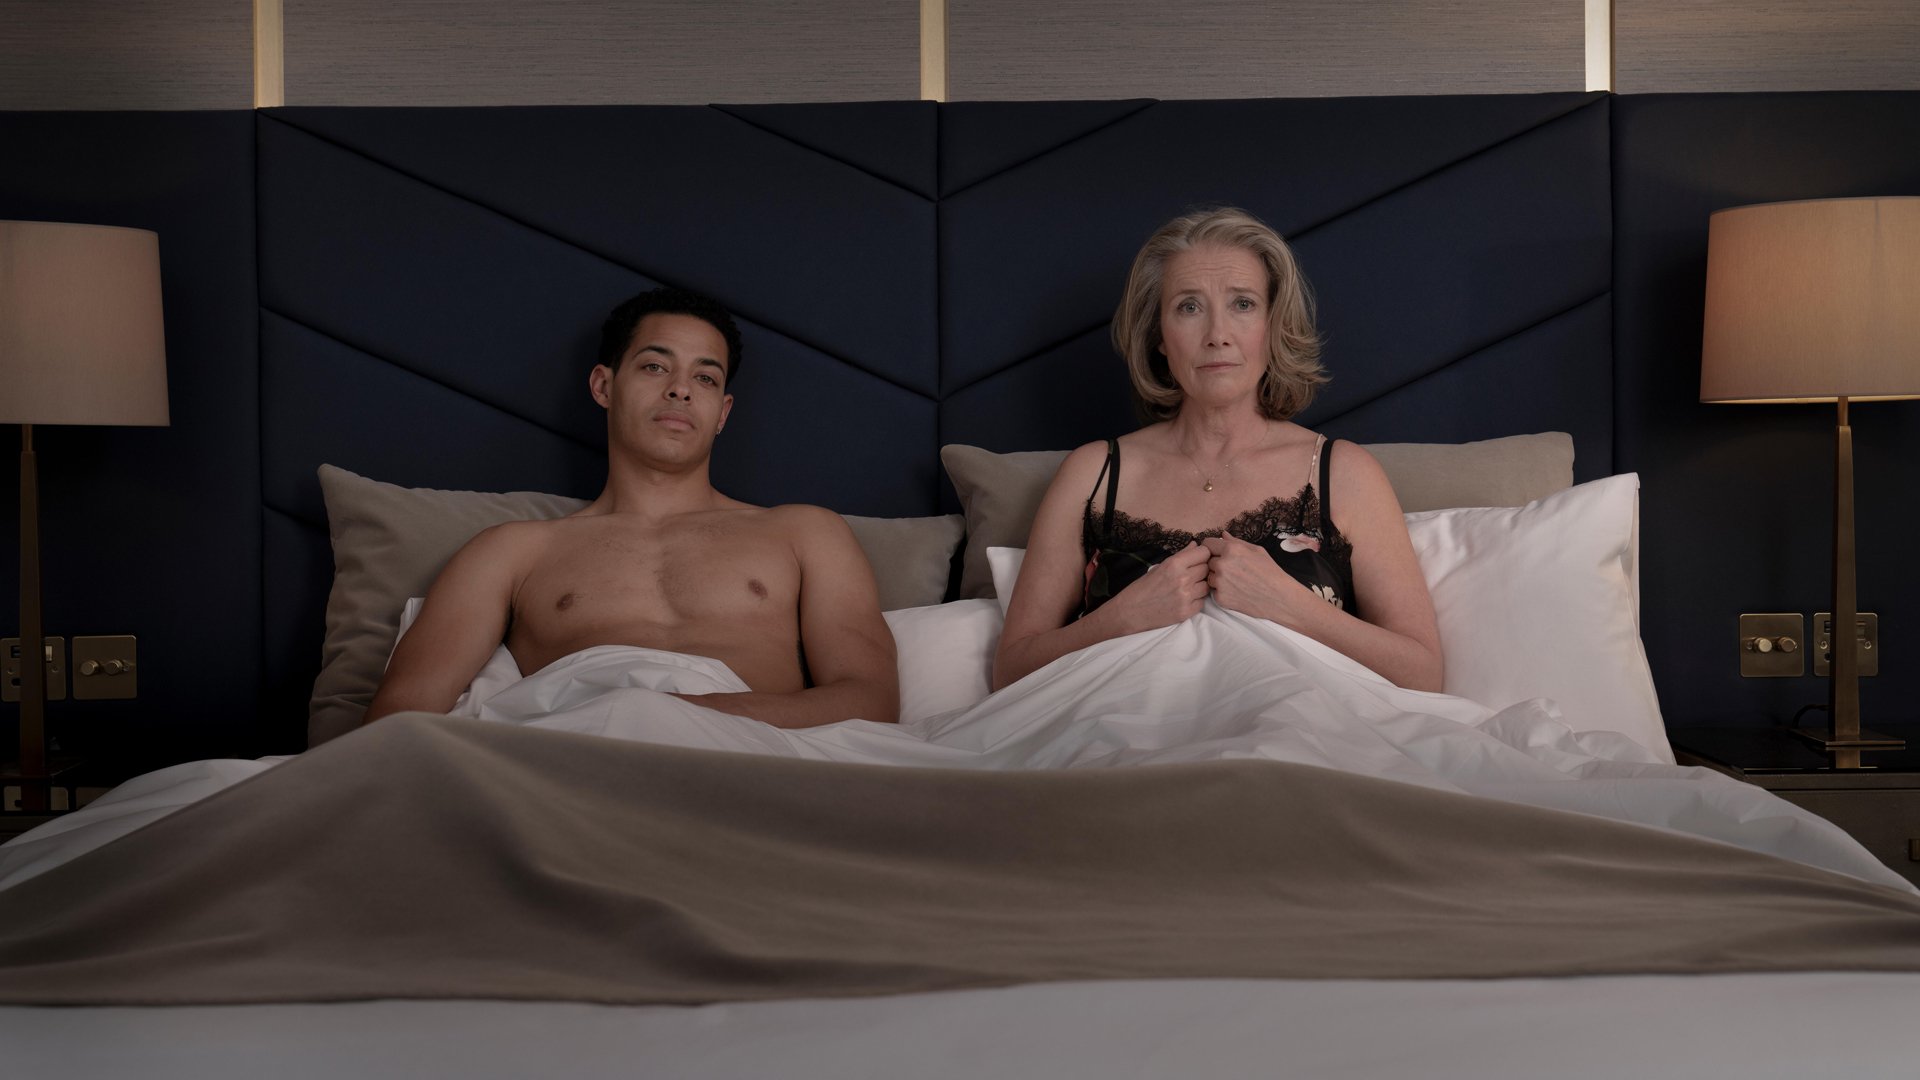 A man and woman in their underwear sit in bed with the covers pulled up, looking at the camera.